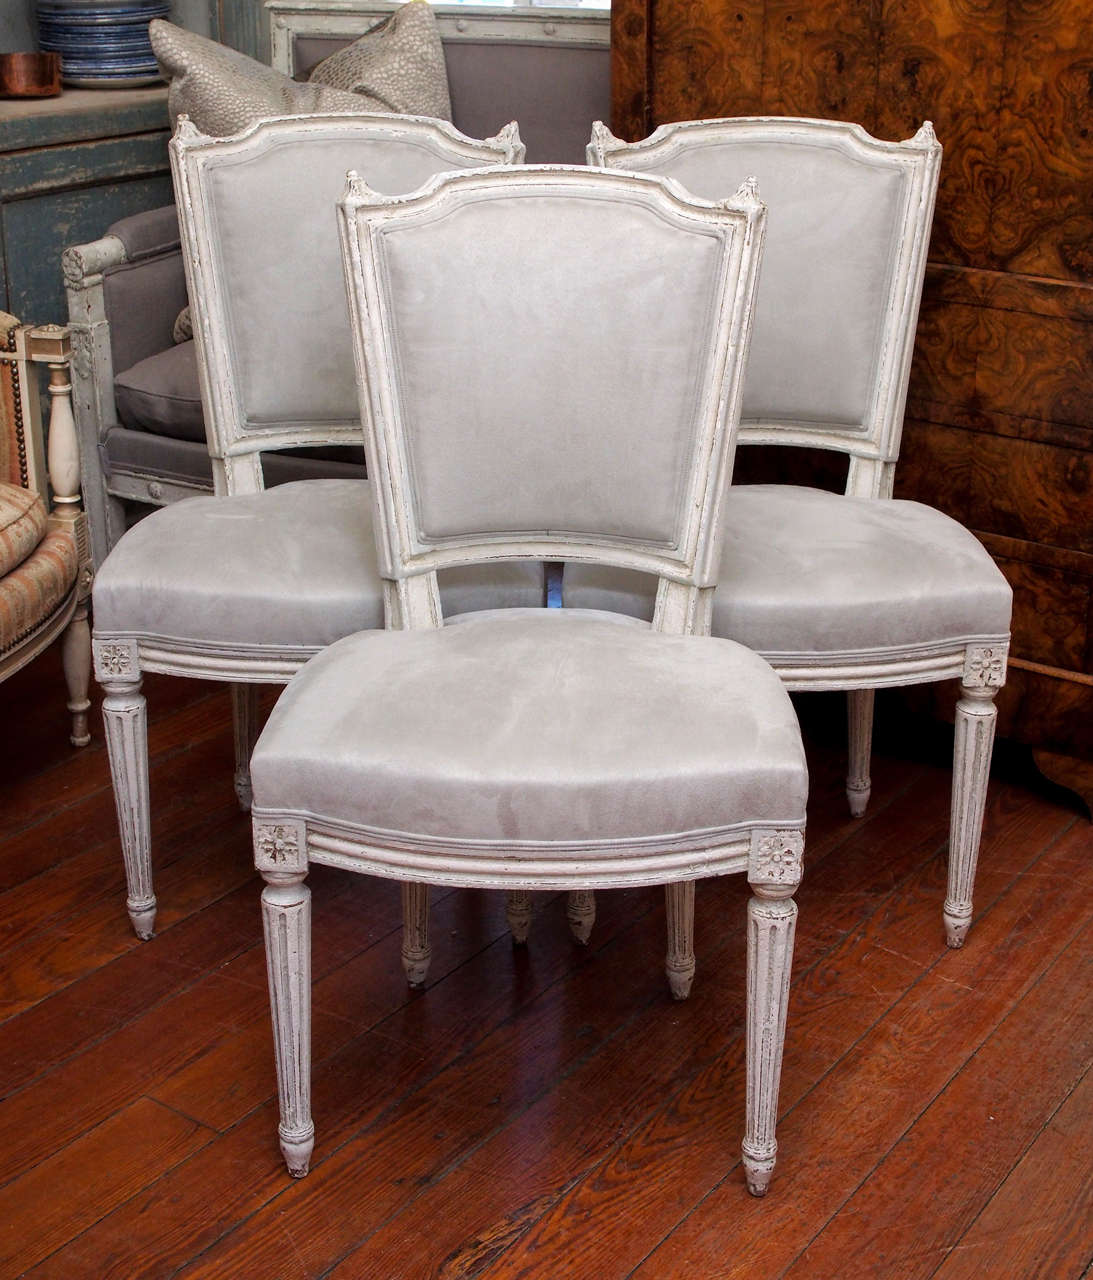 Set of 12 dining room chairs late 19th century, freshly painted  in pale grey and white  and newly upholstered in a grey velvet fabric.